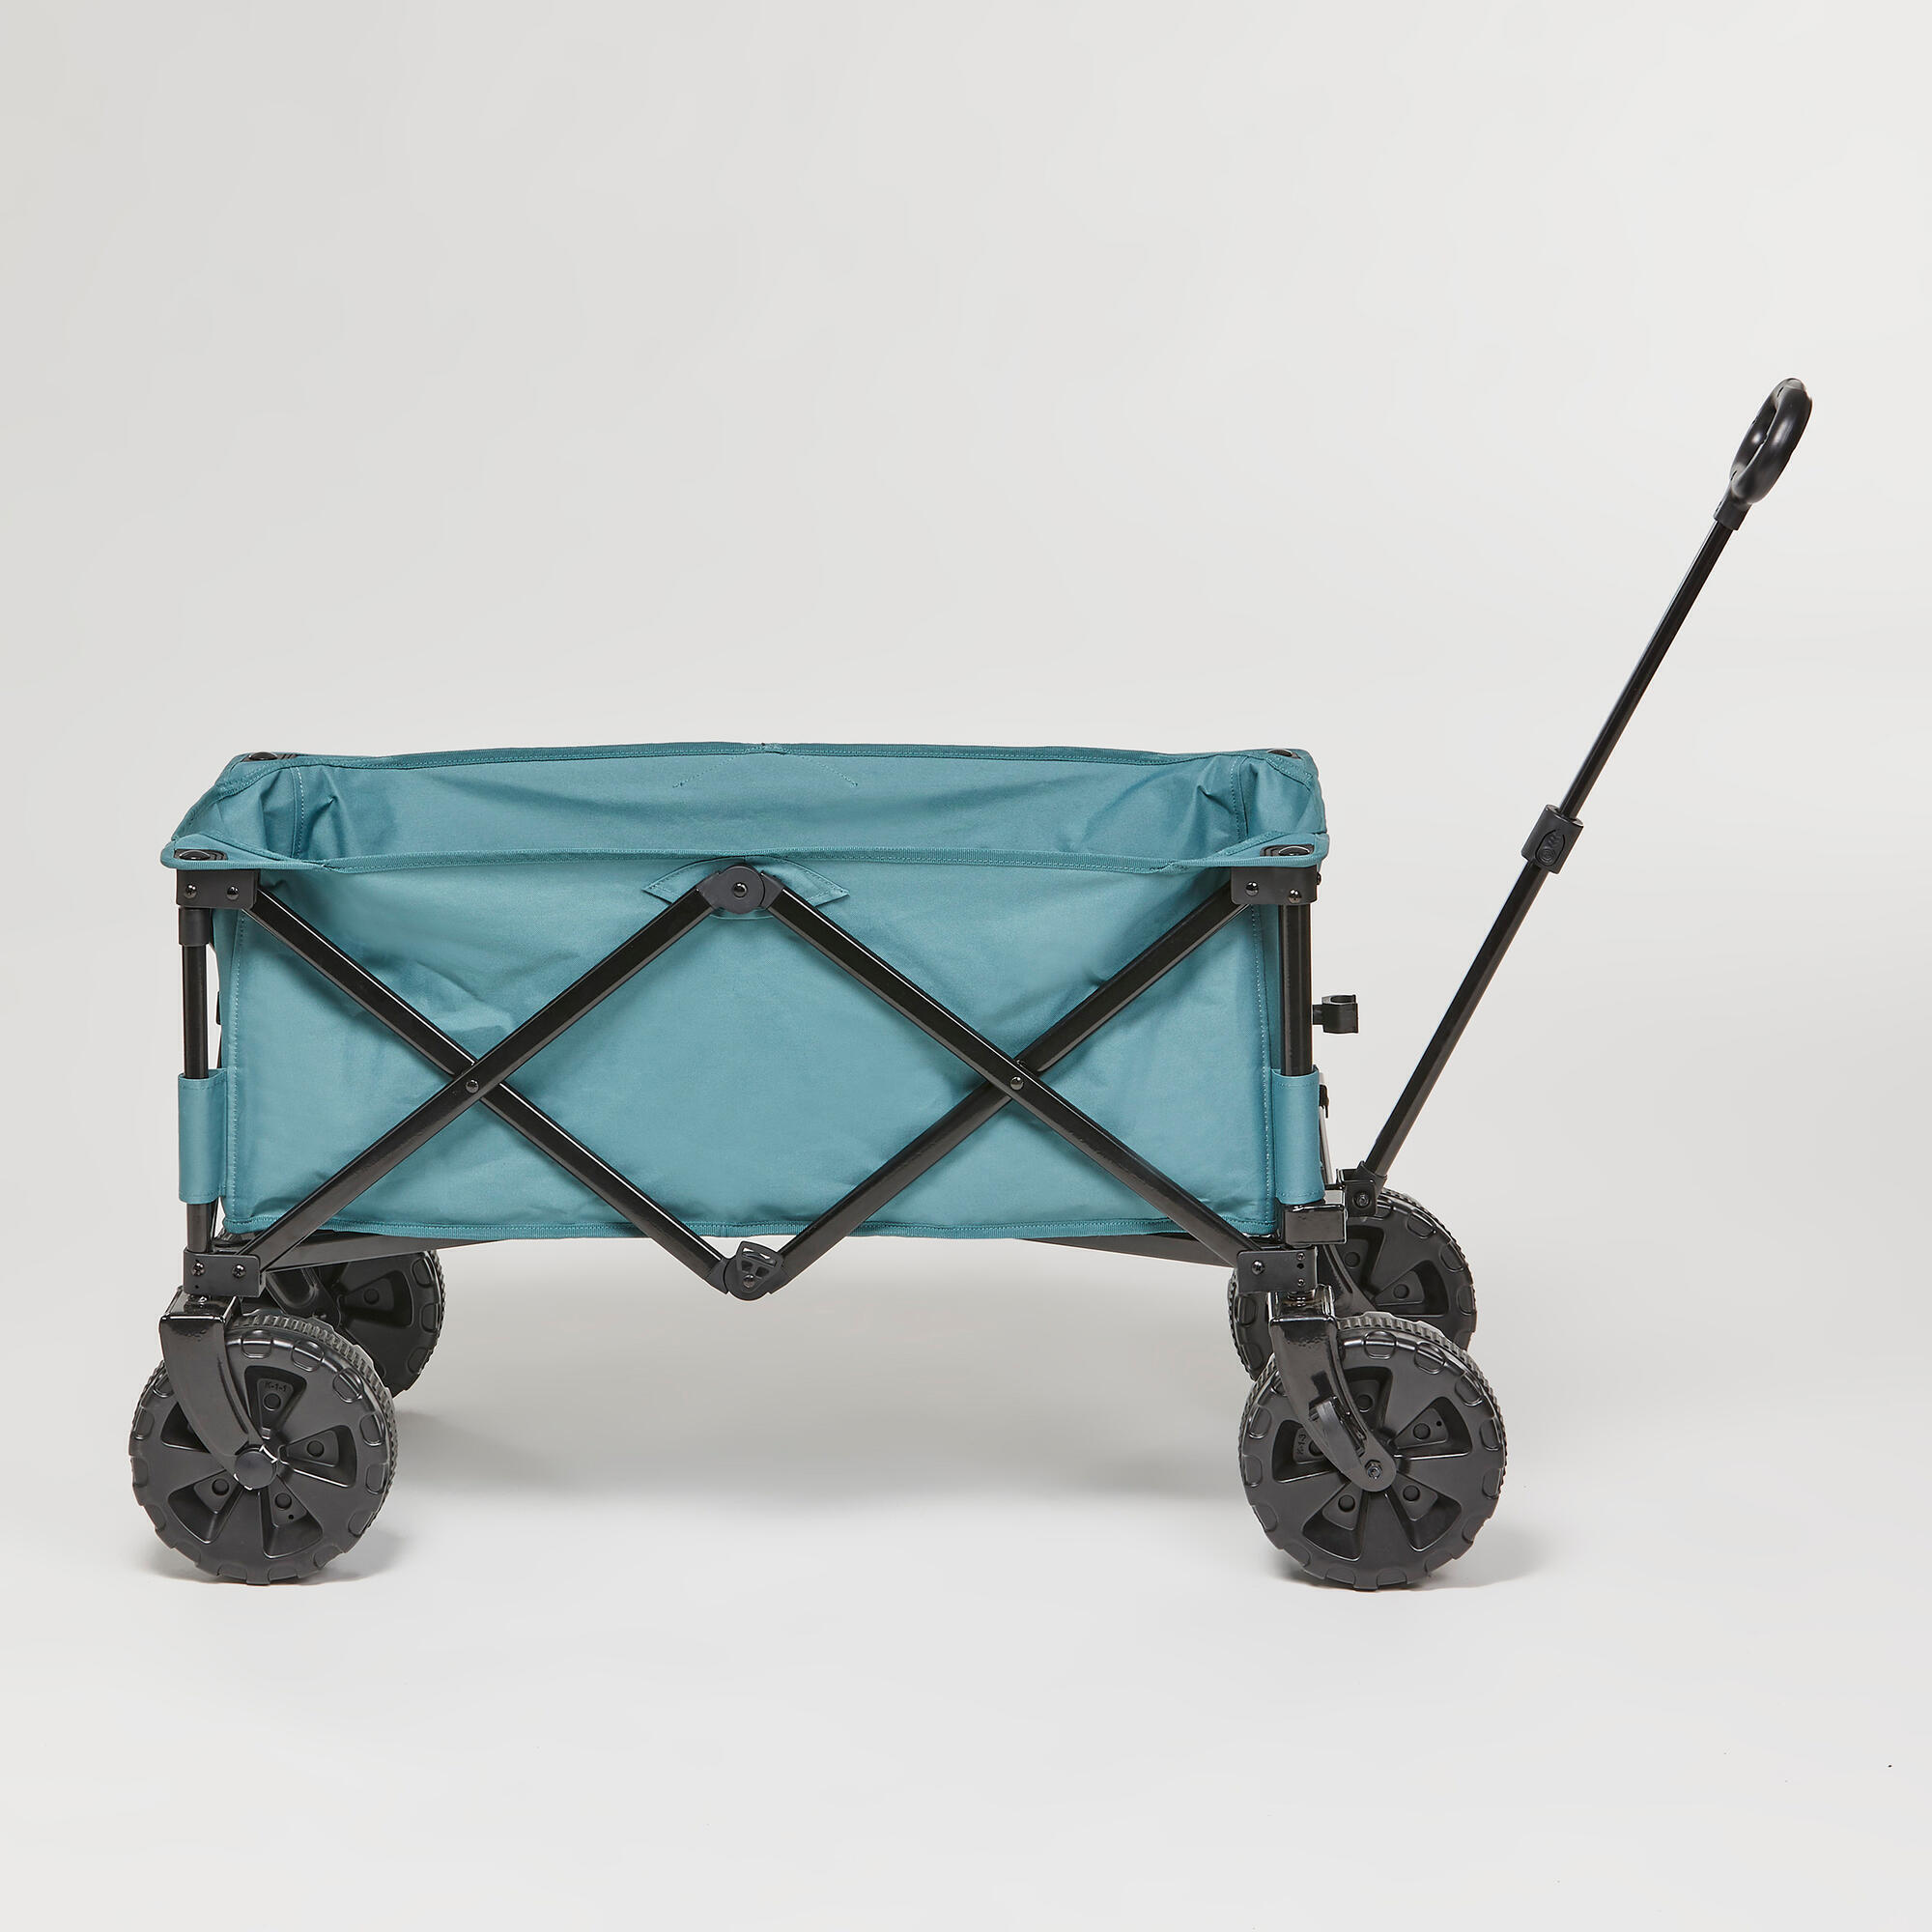 All Terrain Transport Cart For Camping Equipment - Trolley All Road 1/7